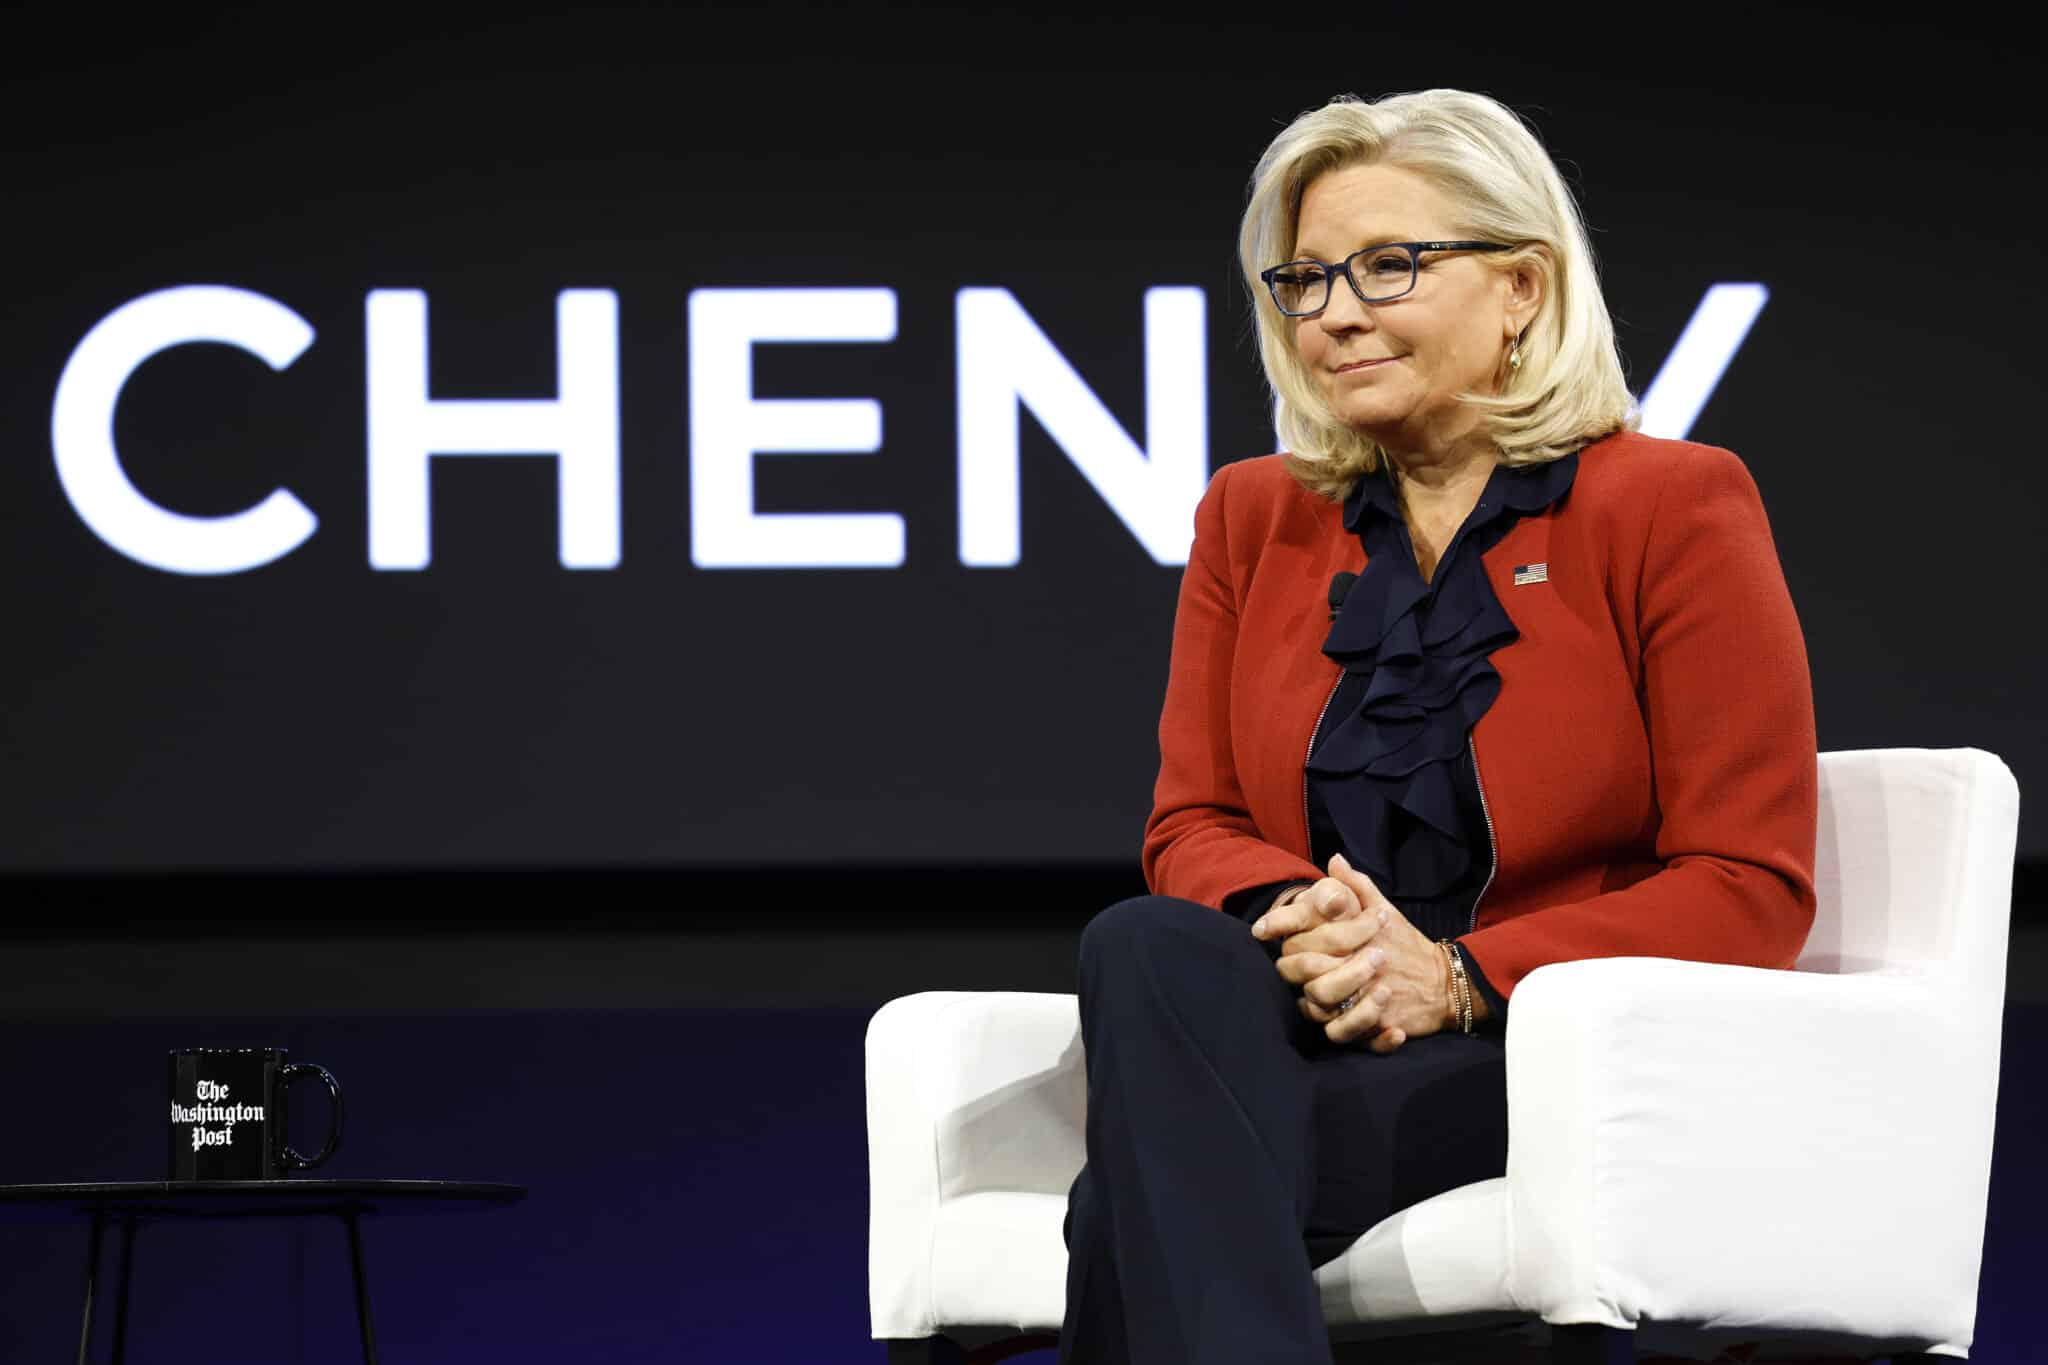 WASHINGTON, DC - NOVEMBER 15: Rep. Liz Cheney (R-WY) speaks during the Washington Post Global Women's Summit at the newspaper's headquarters on November 15, 2022 in Washington, DC. The inaugural summit featured a collection of speakers ranging from activists to politicians gathered to discuss issues pertaining to women. (Photo by Anna Moneymaker/Getty Images)